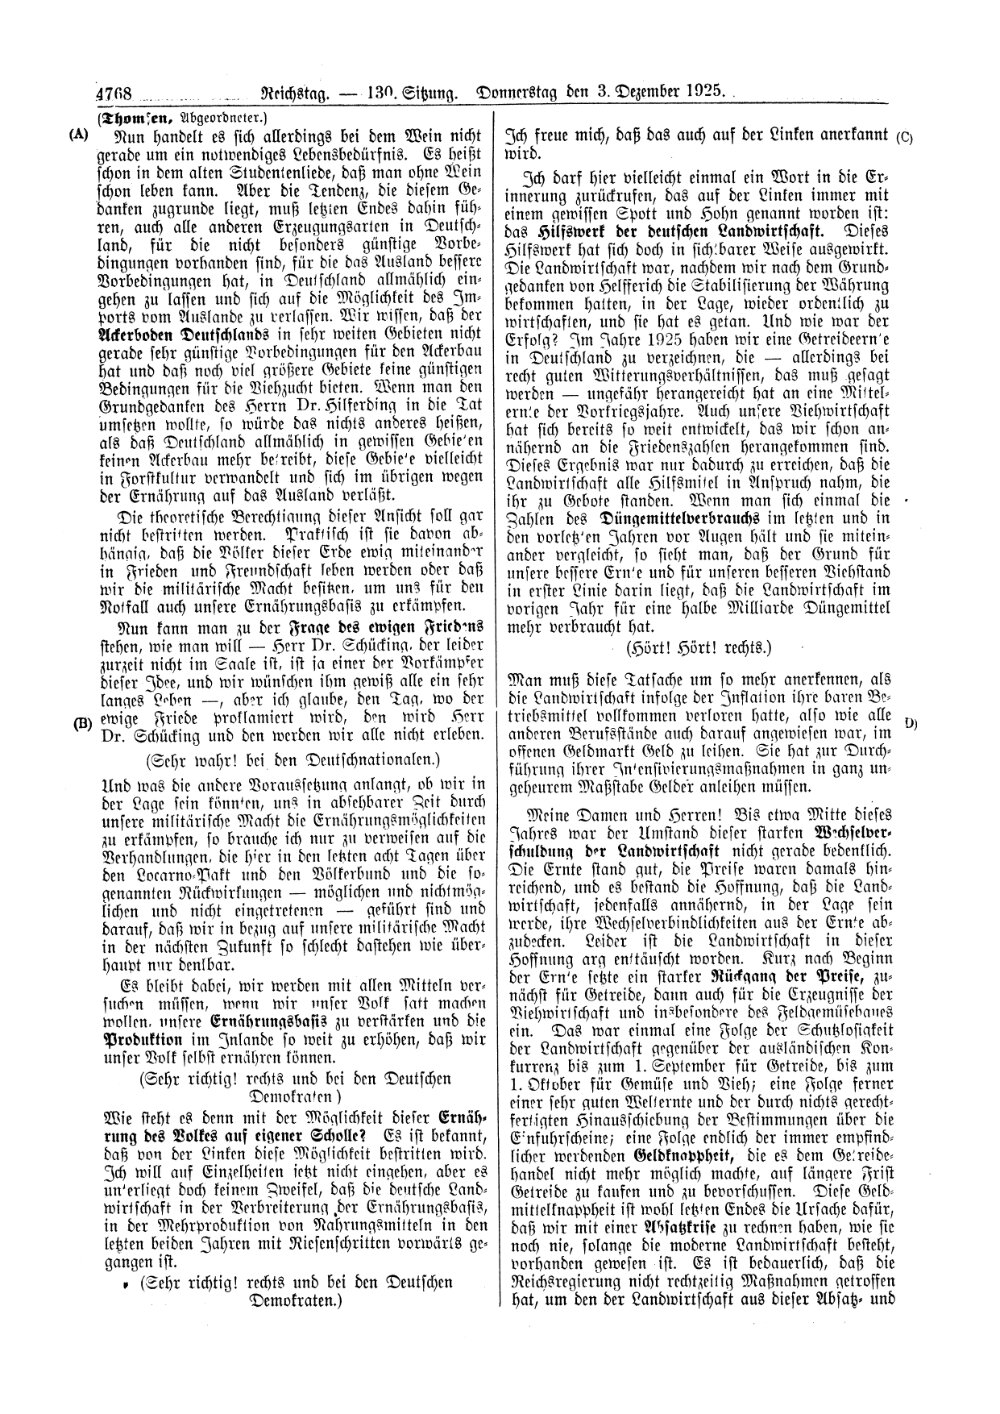 Scan of page 4768